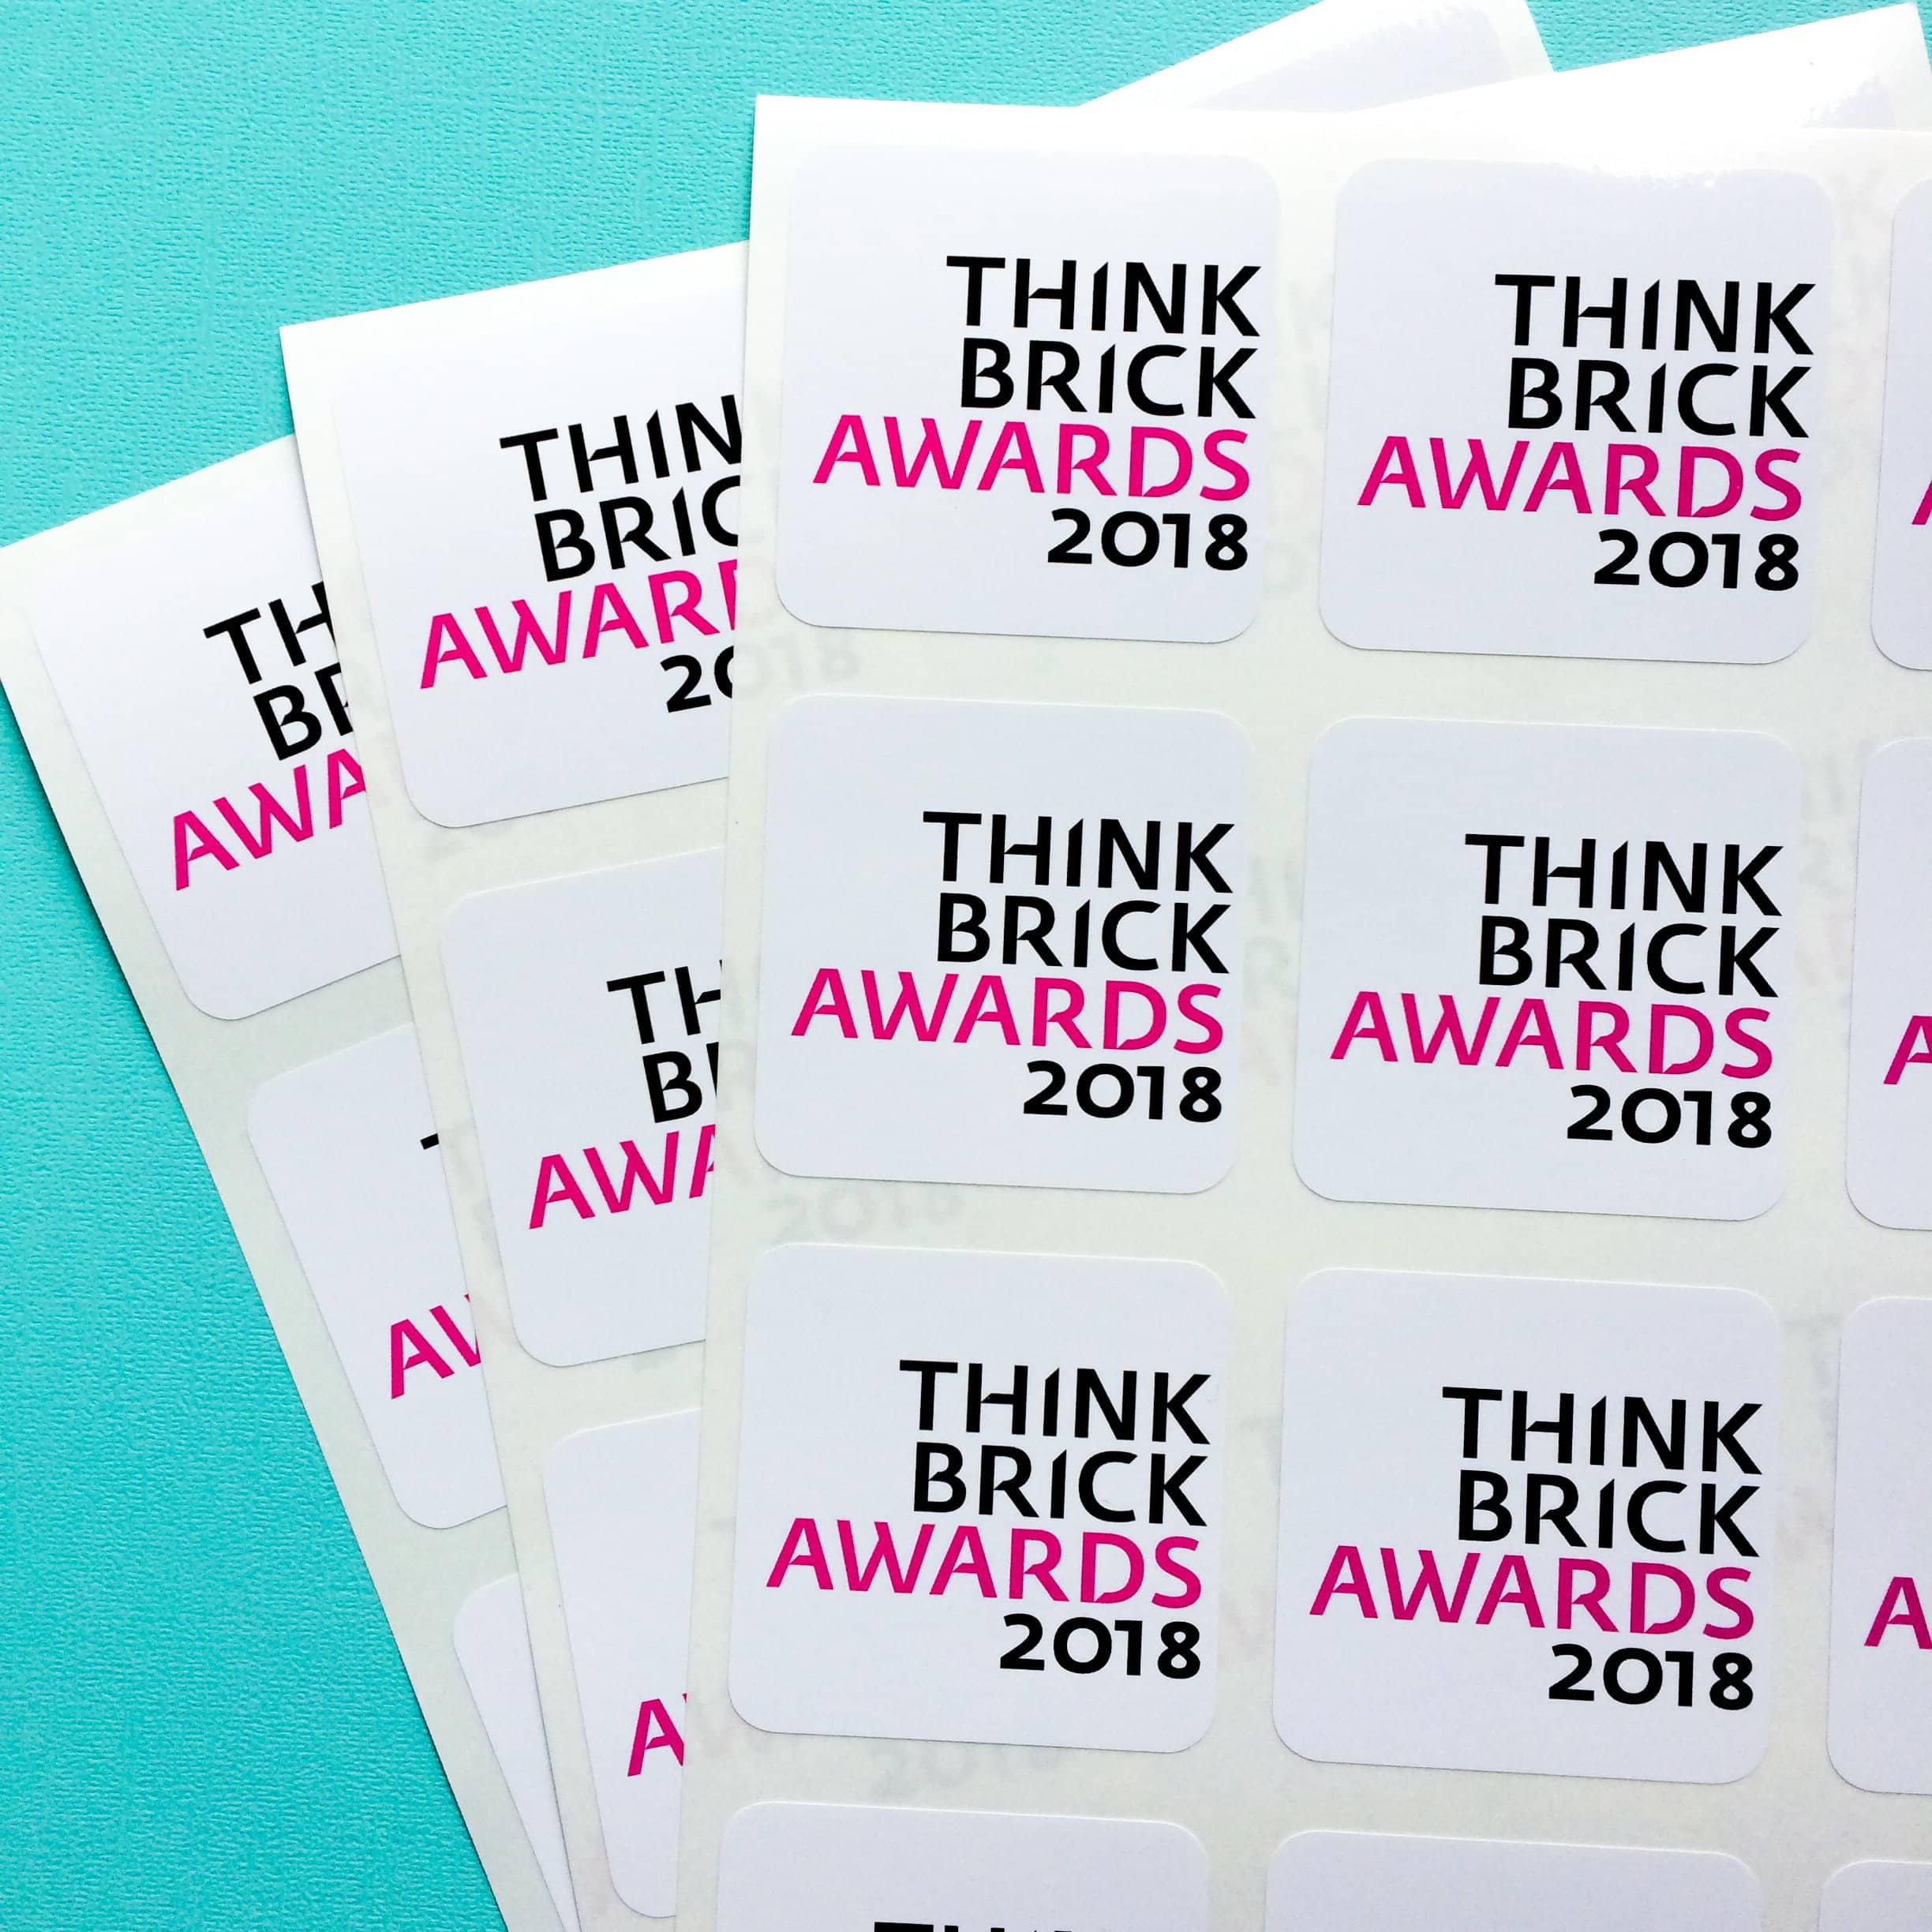 Think Brick Awards 2018 event square sheet label stickers